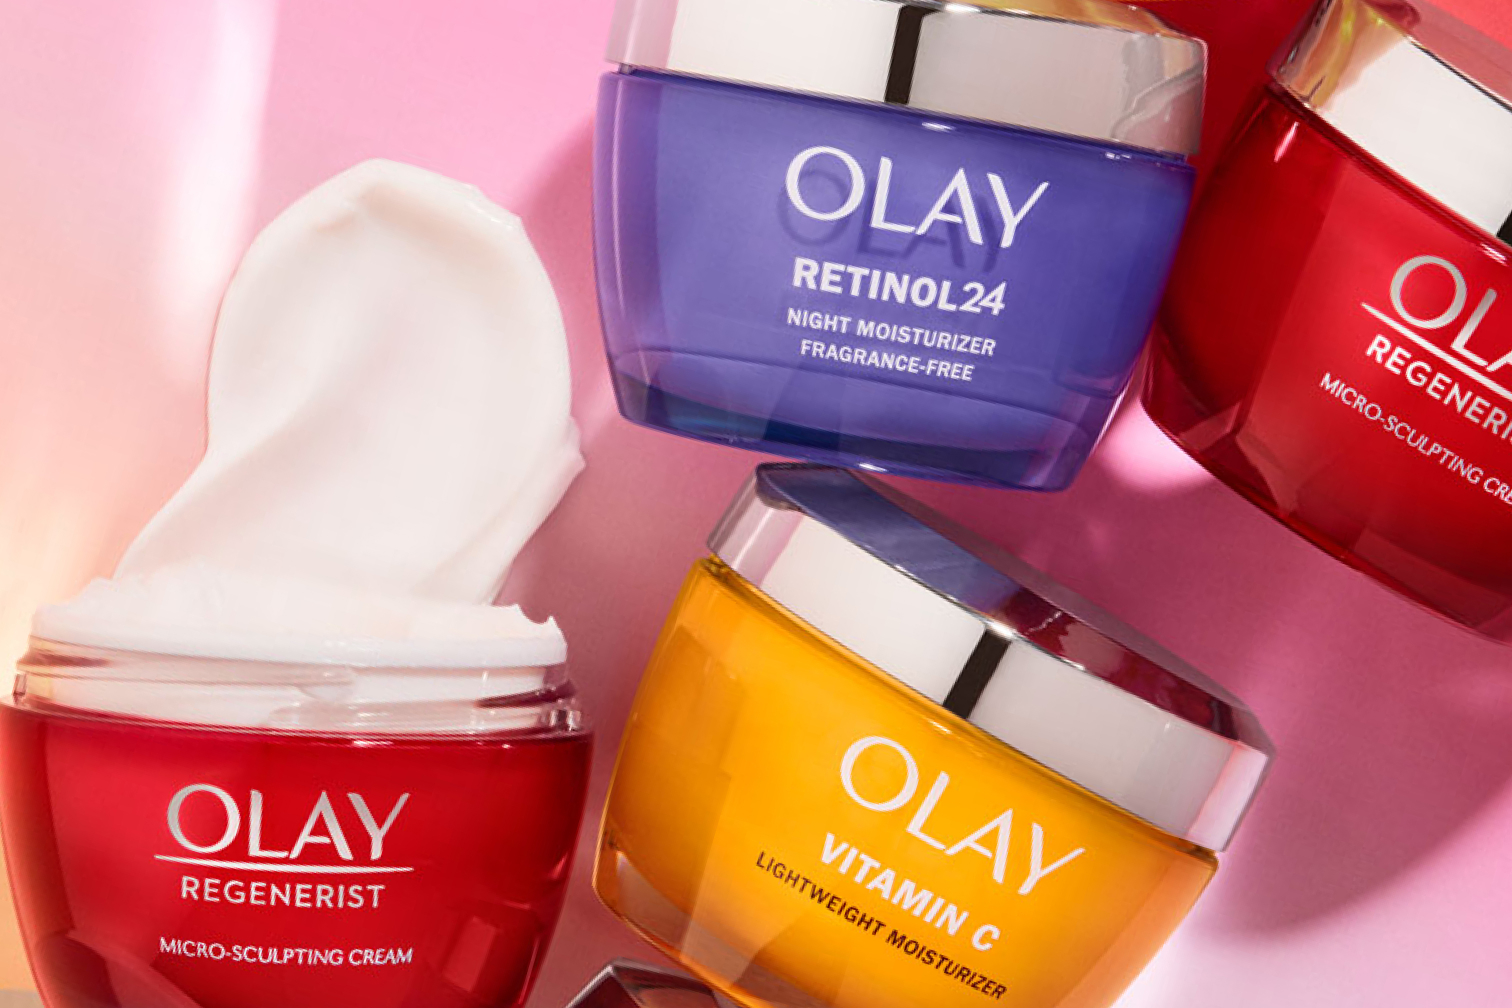 Olay micro sculpting cream without a lid and moisturizer spread out above it. Olay Retinol 24 and Vitamin C moisturizer jars are beside it.